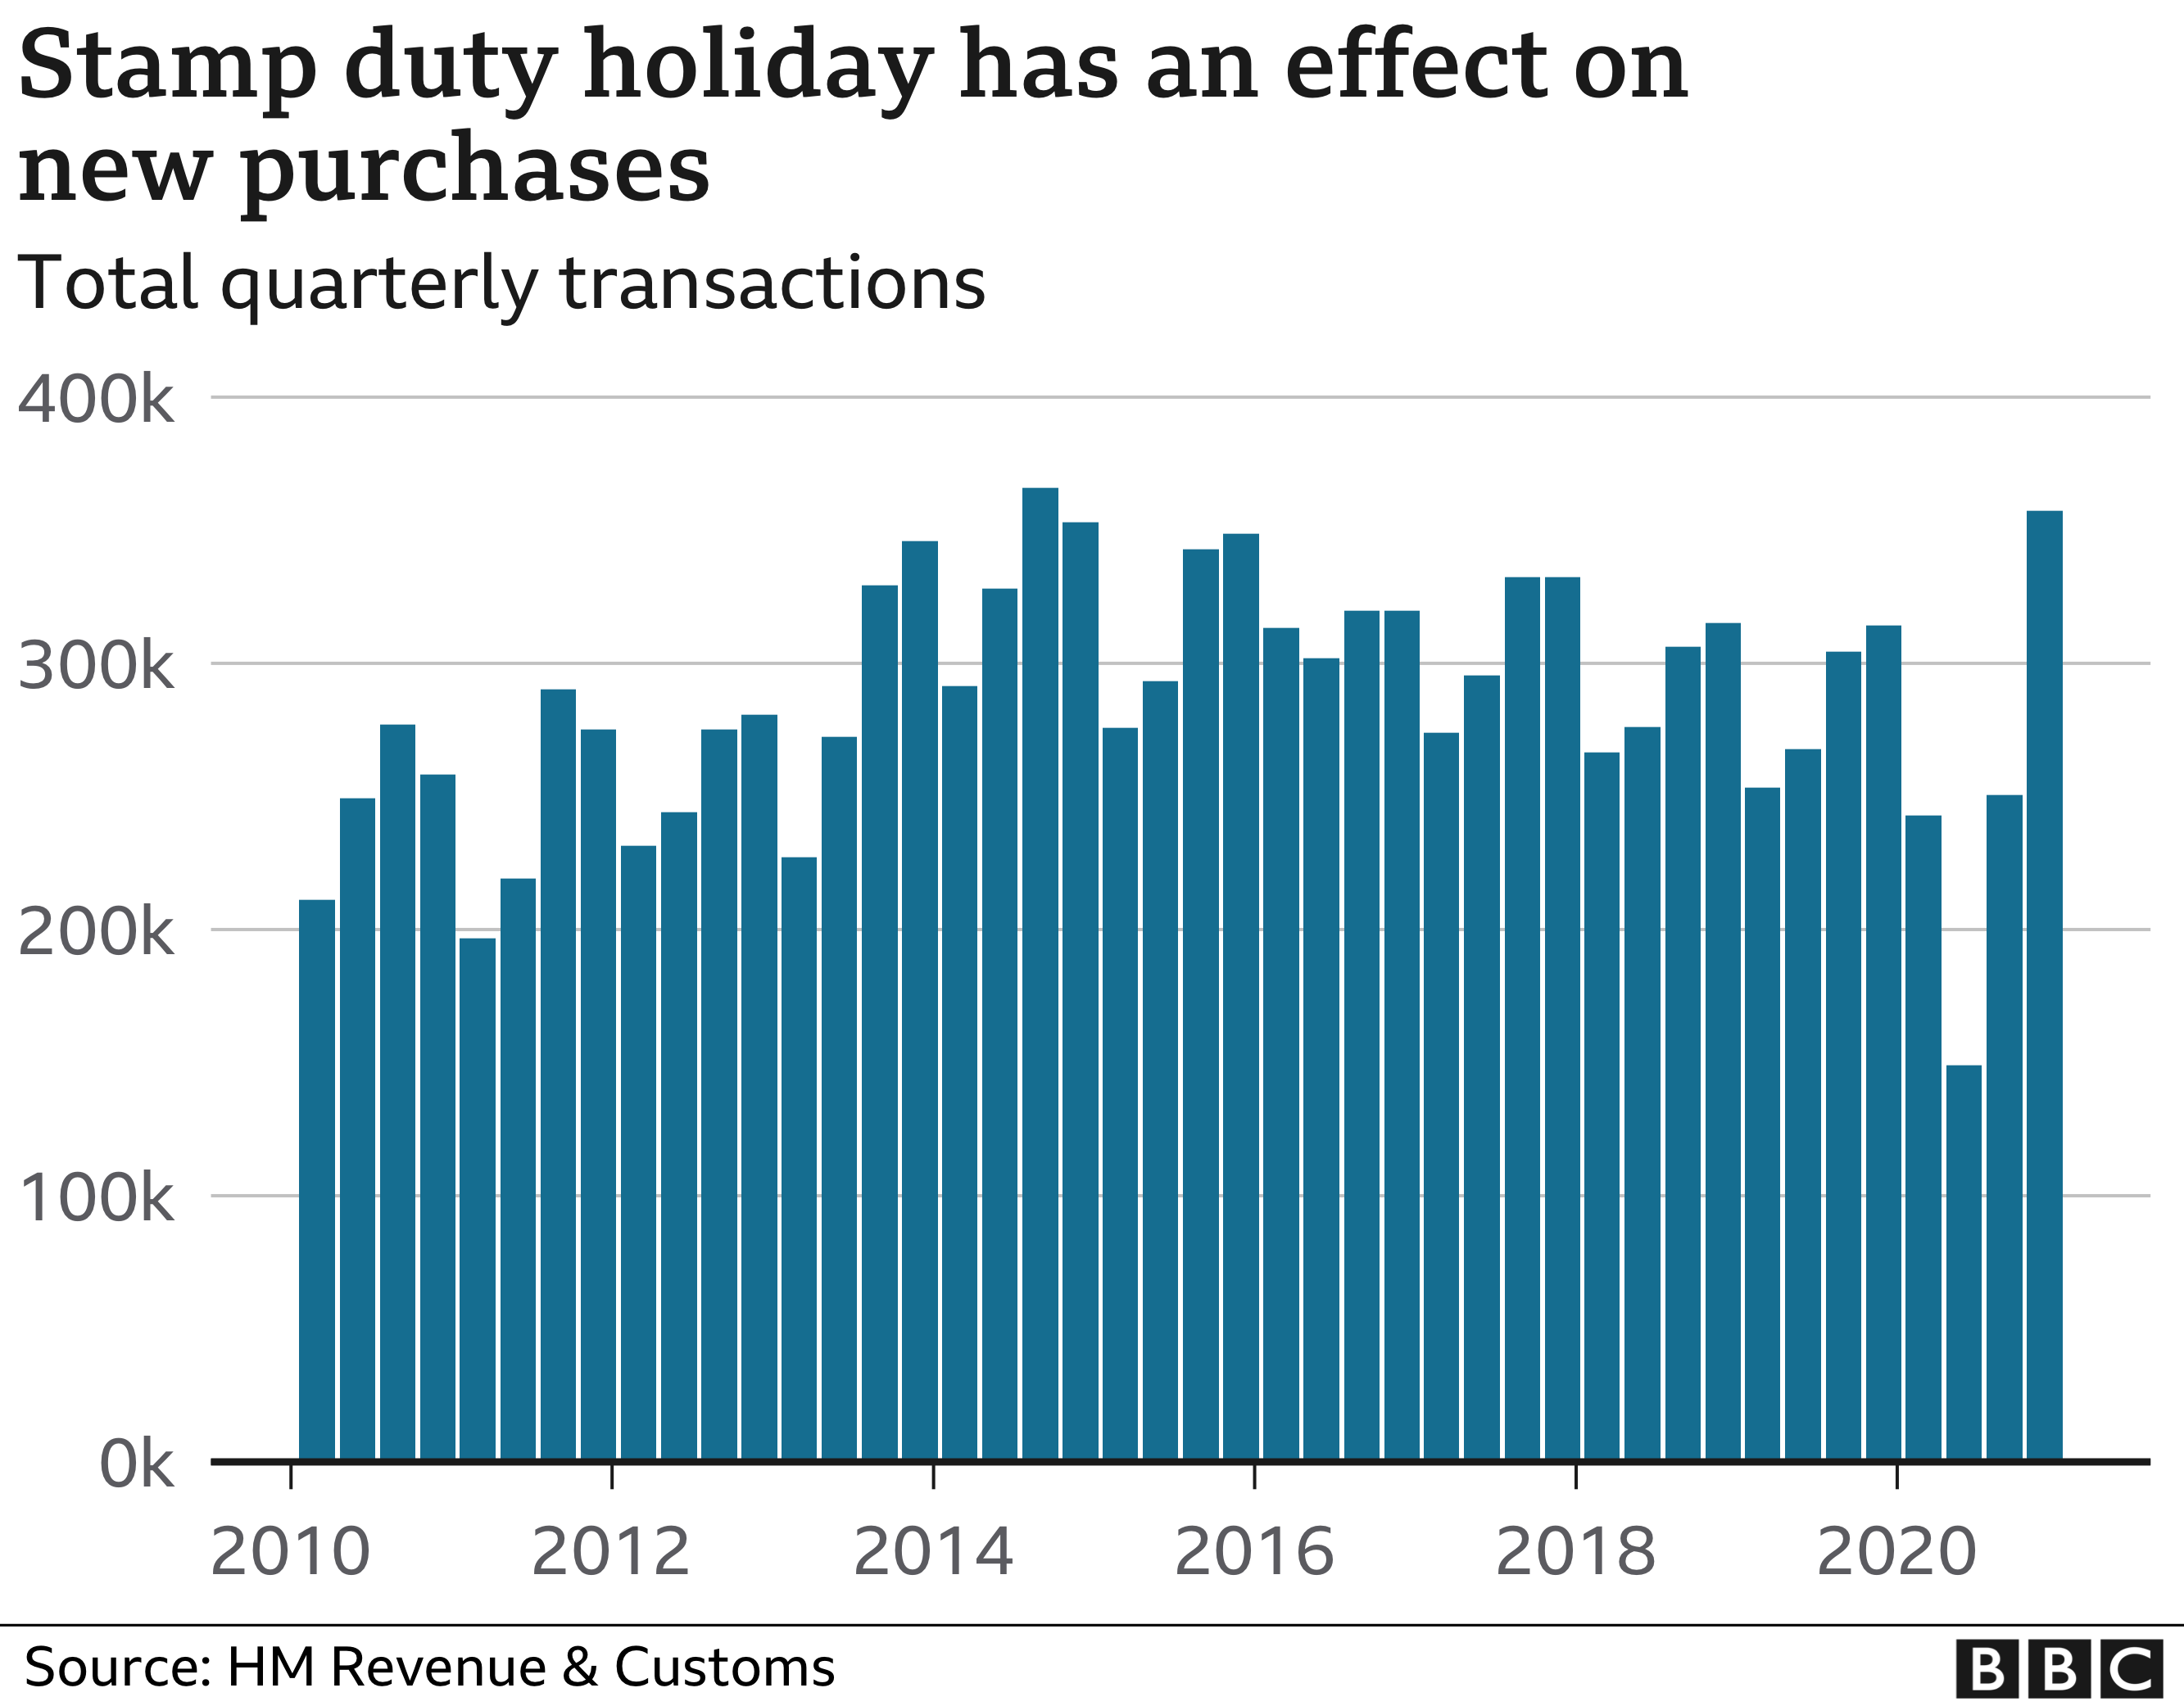 Number of property transaction impacted by Stamp Duty Holiday